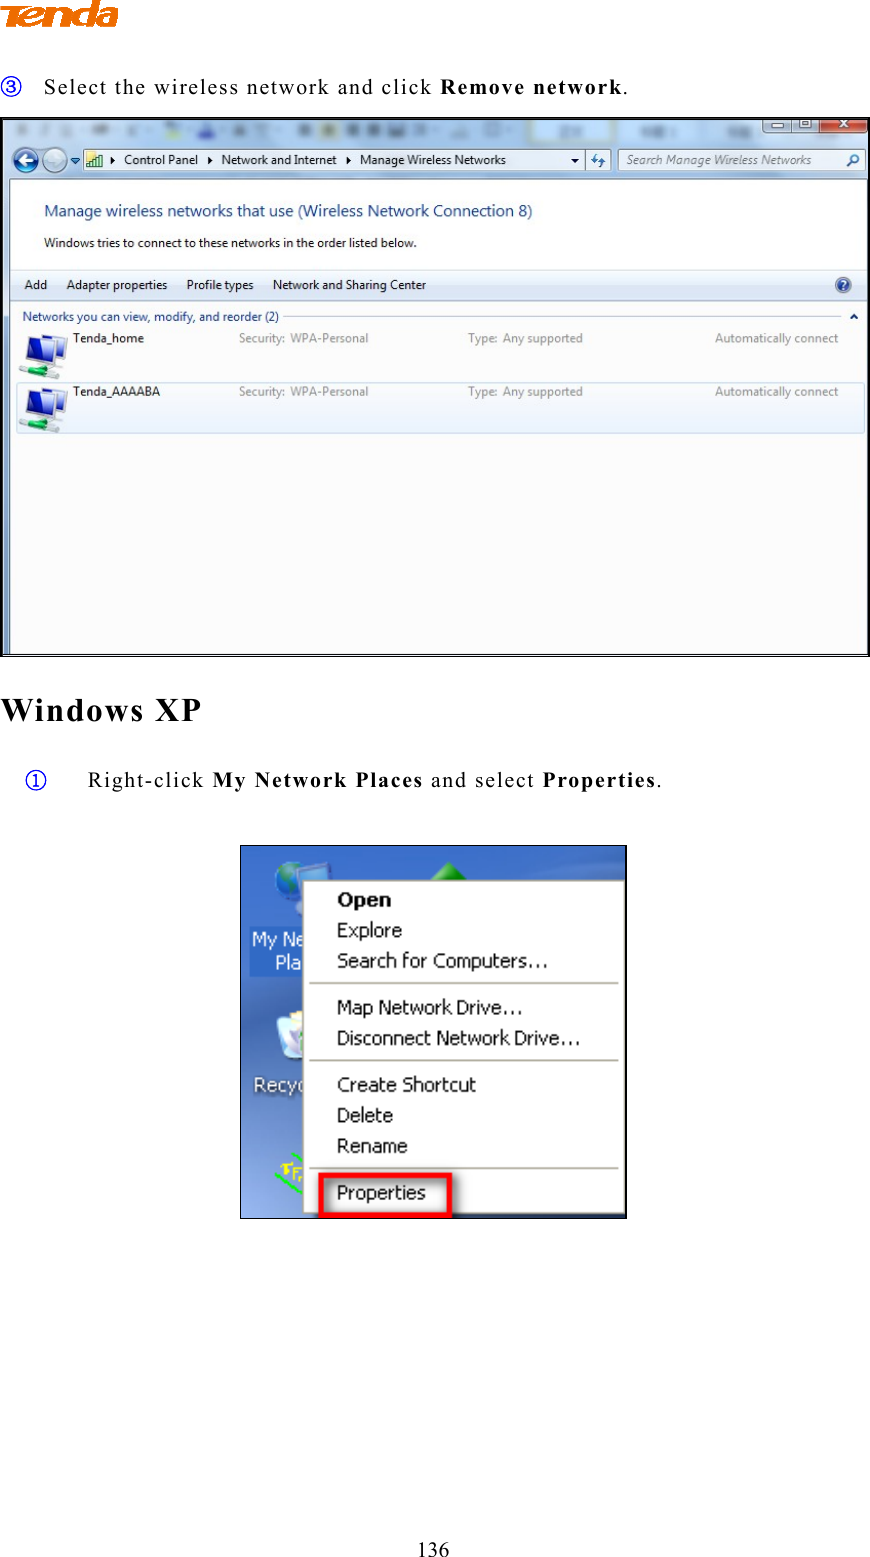                                   136 ③ Select the wireless network and click Remove network.  Windows XP ① Right-click My Network Places and select Properties.   